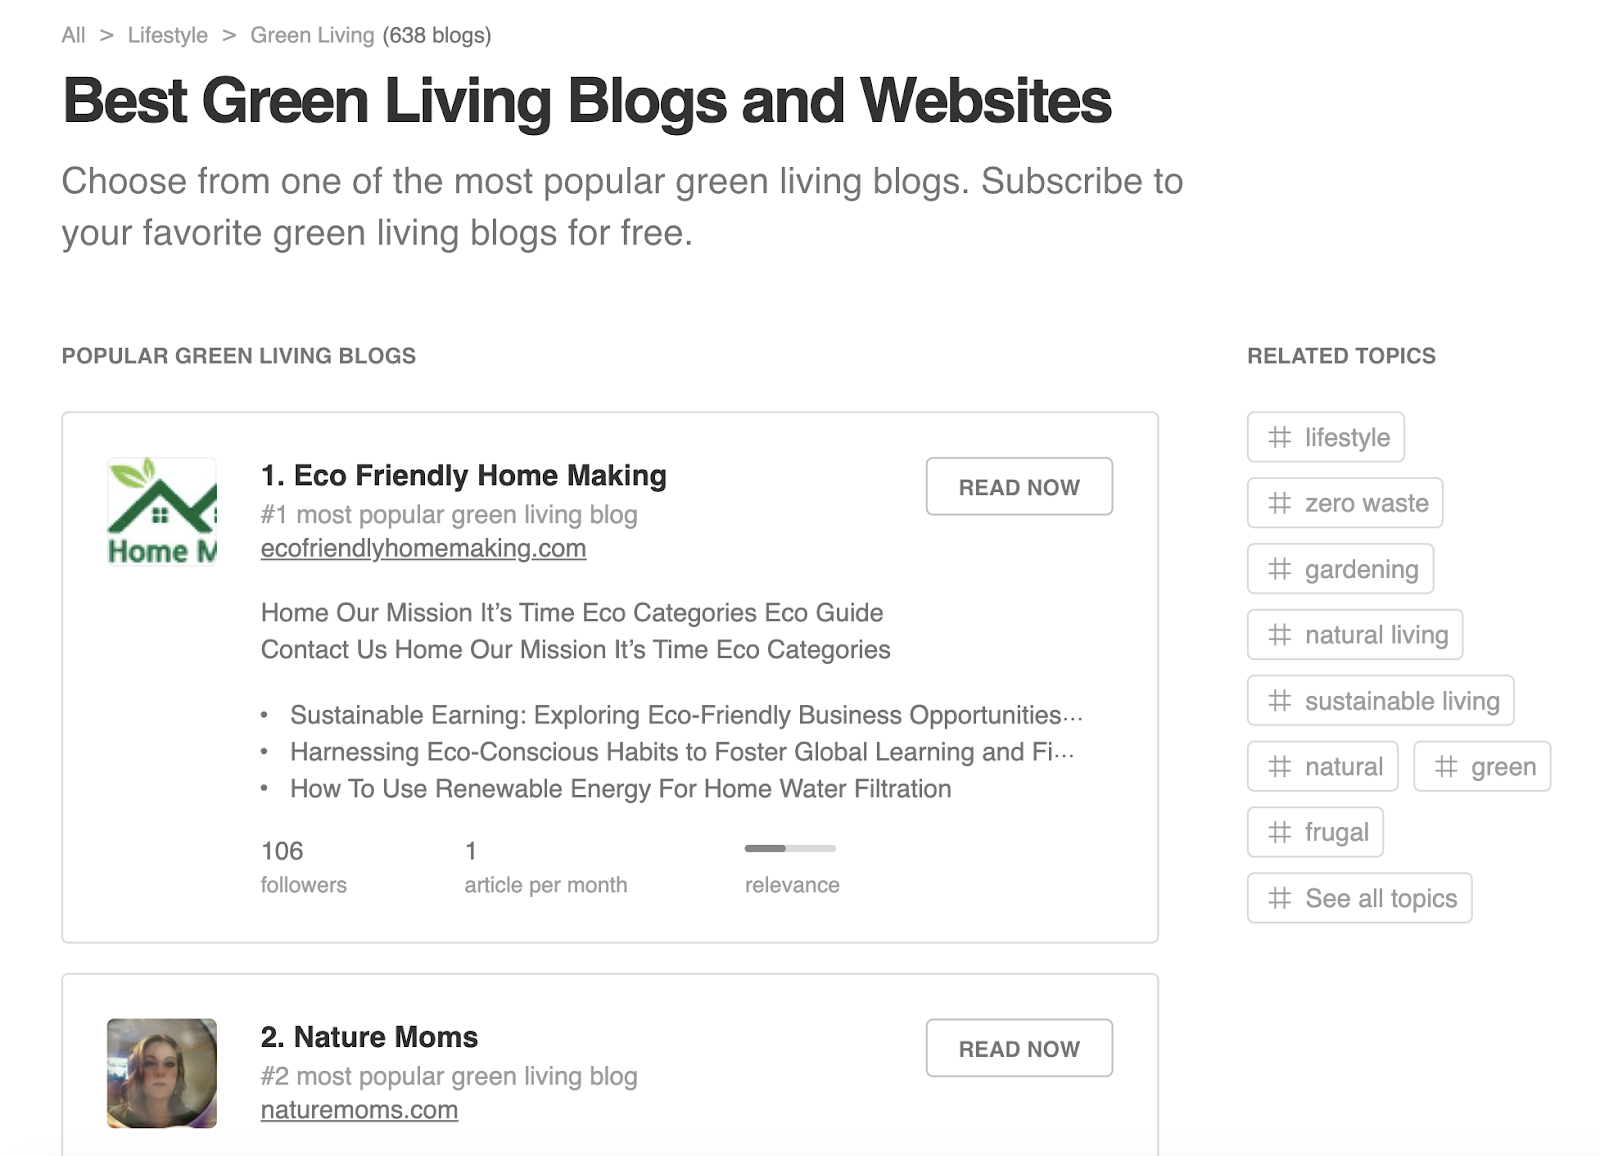 Feedly's site showing best green living blogs and websites